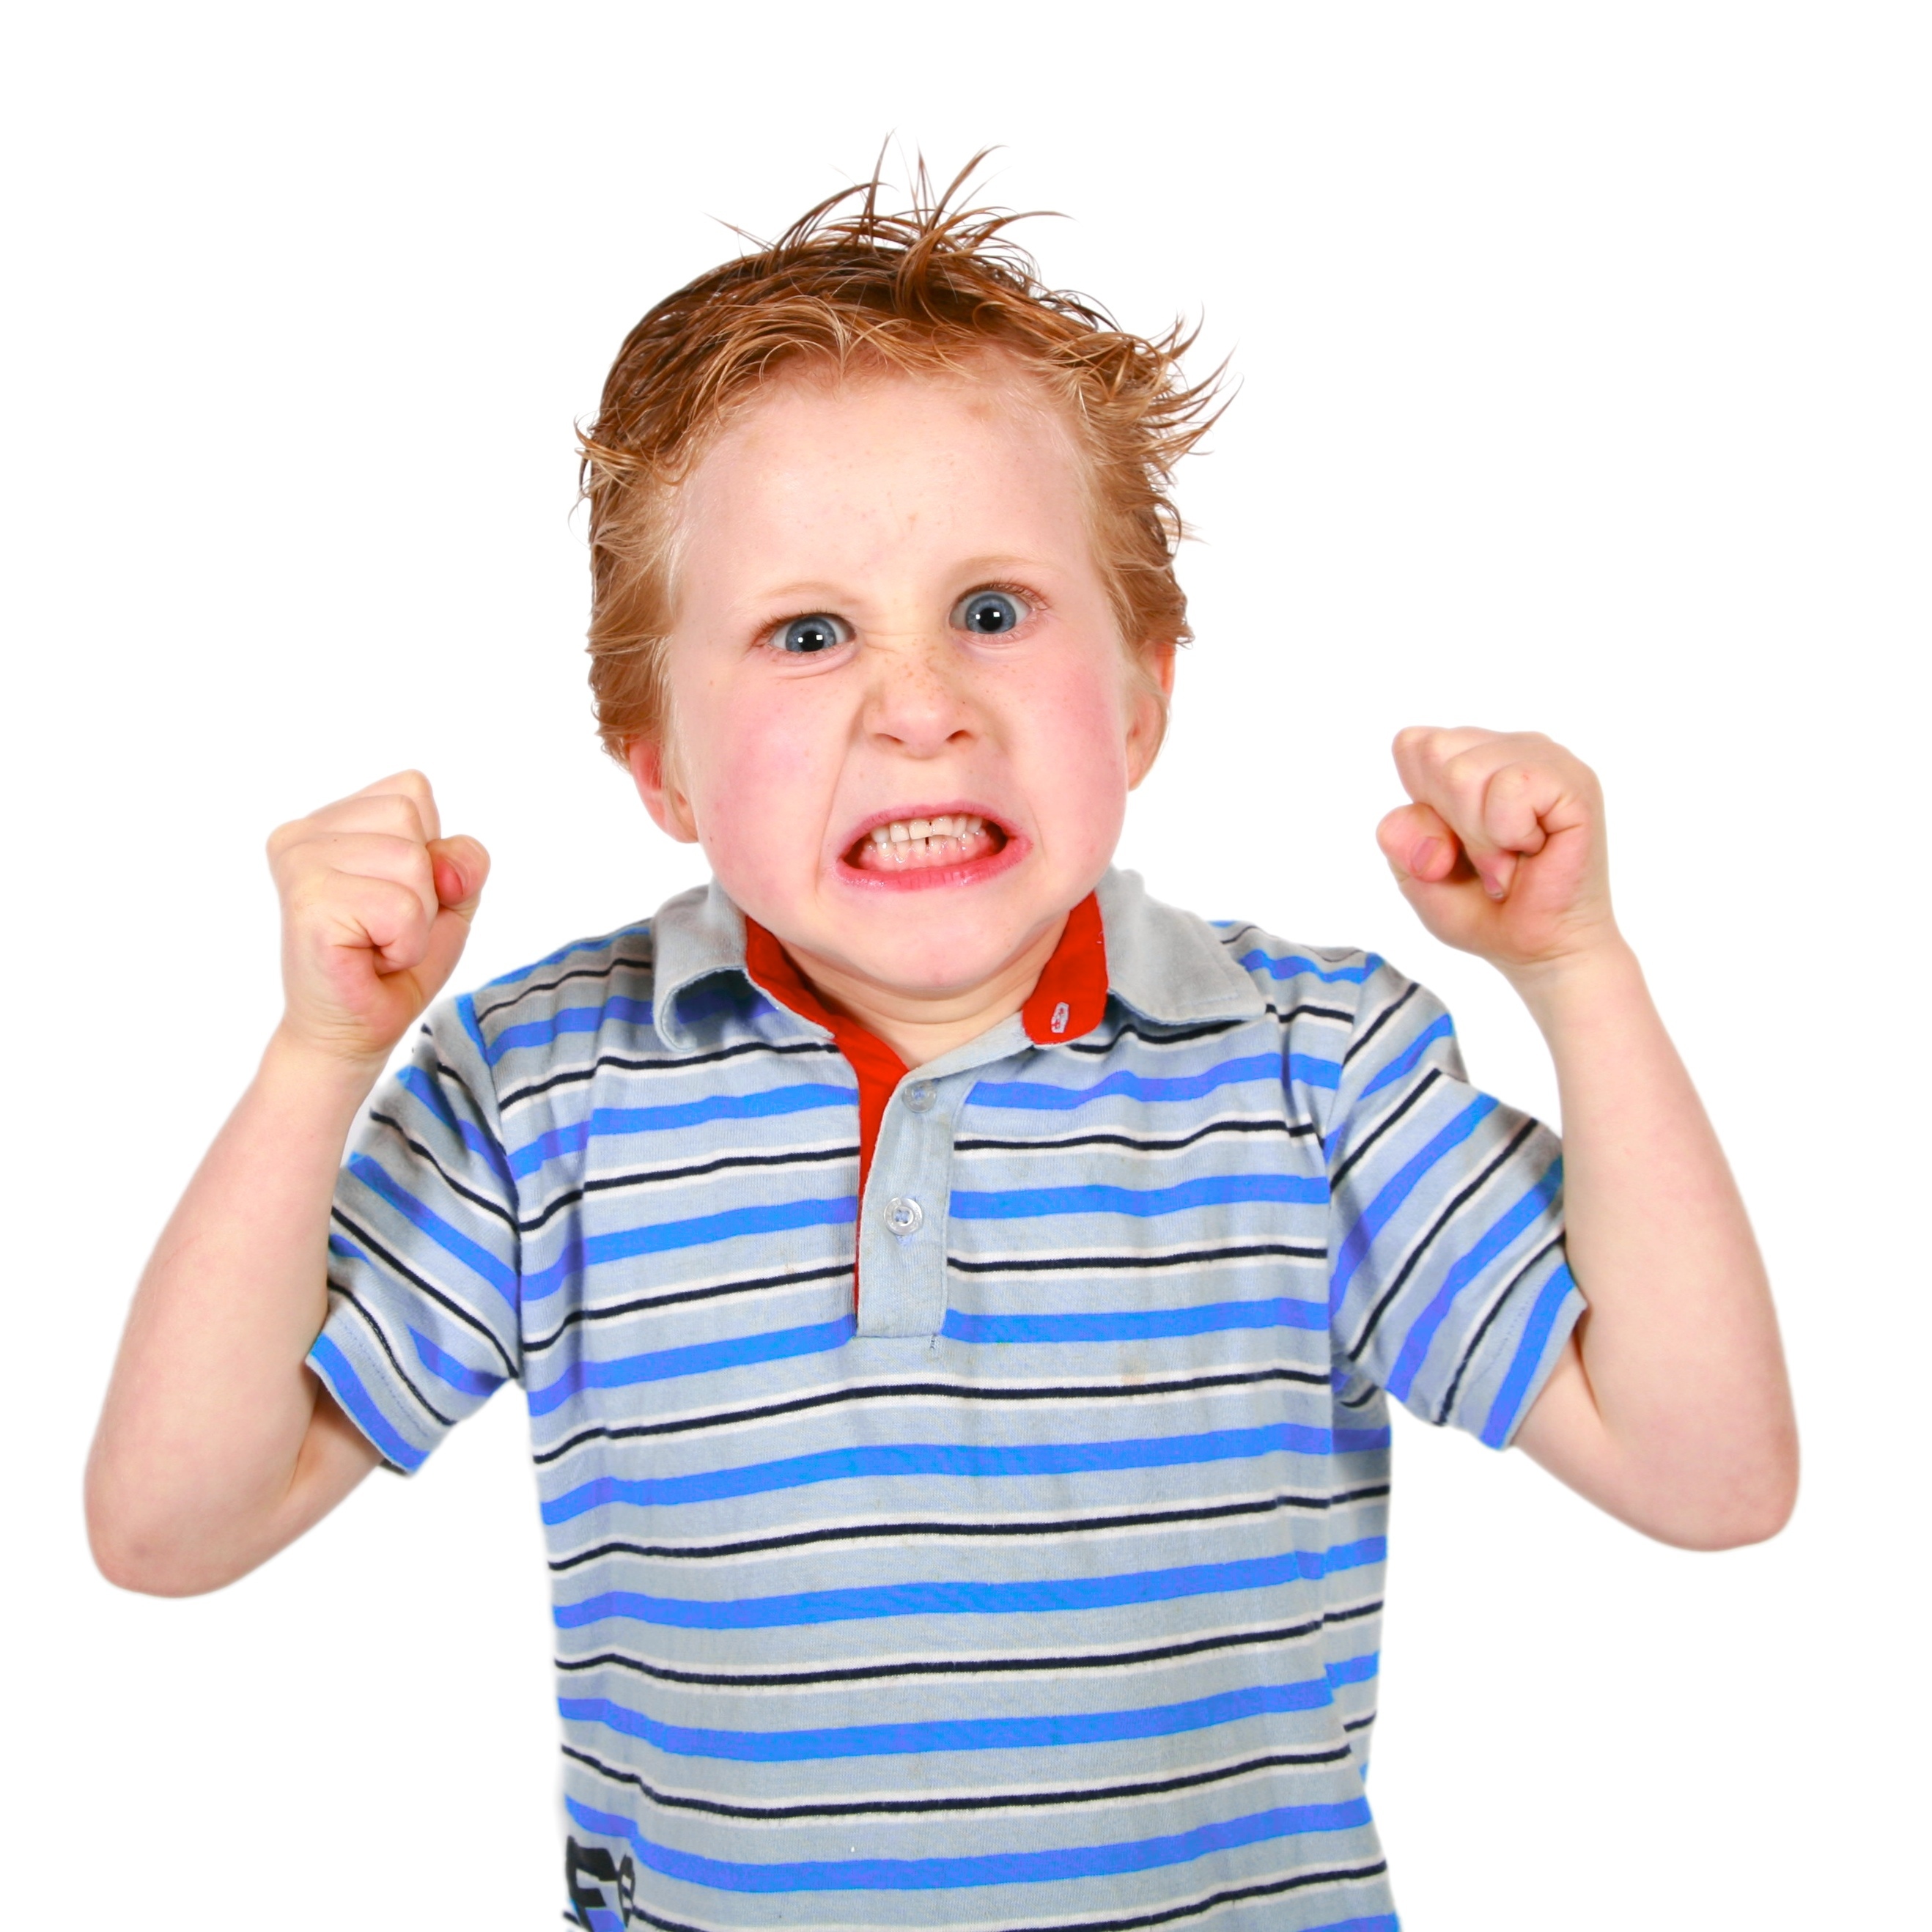 for　Angry　intervention　parents　Child:　teachers　an　and